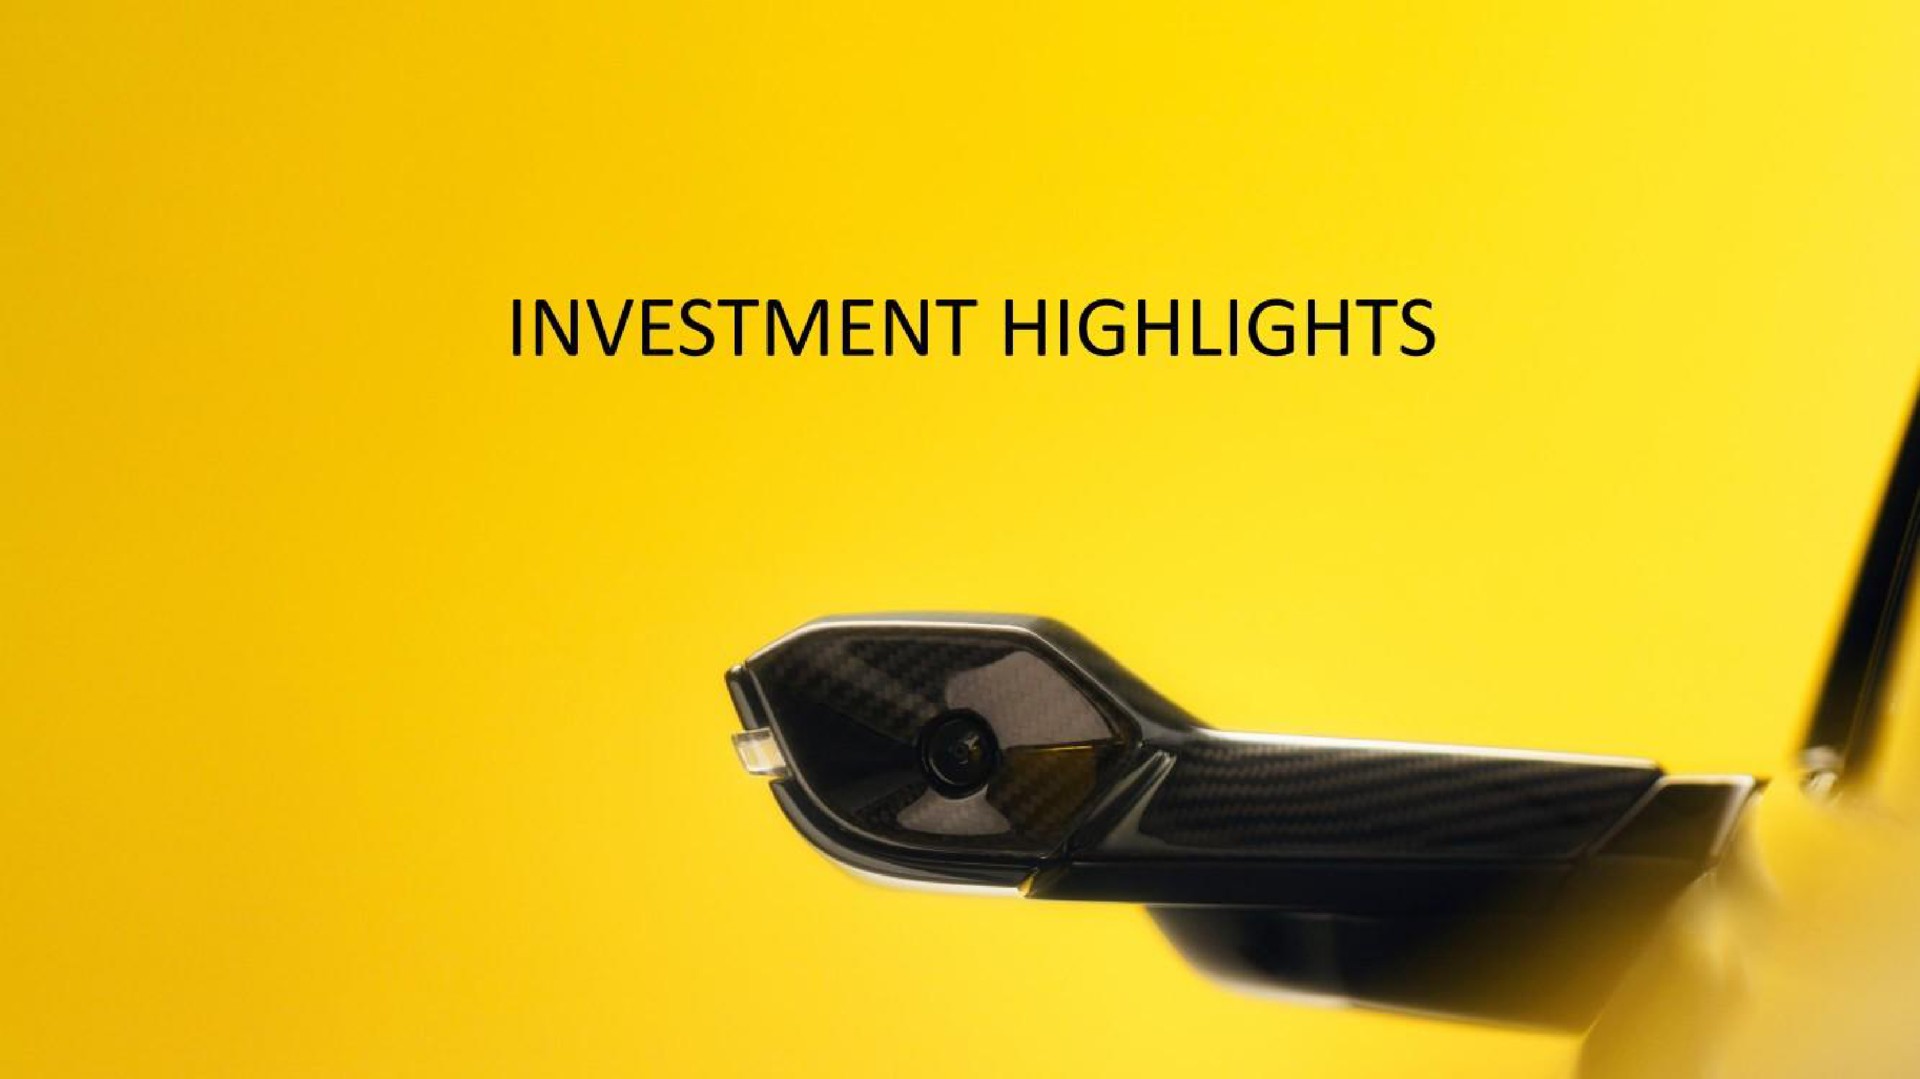 investment highlights | Lotus Cars